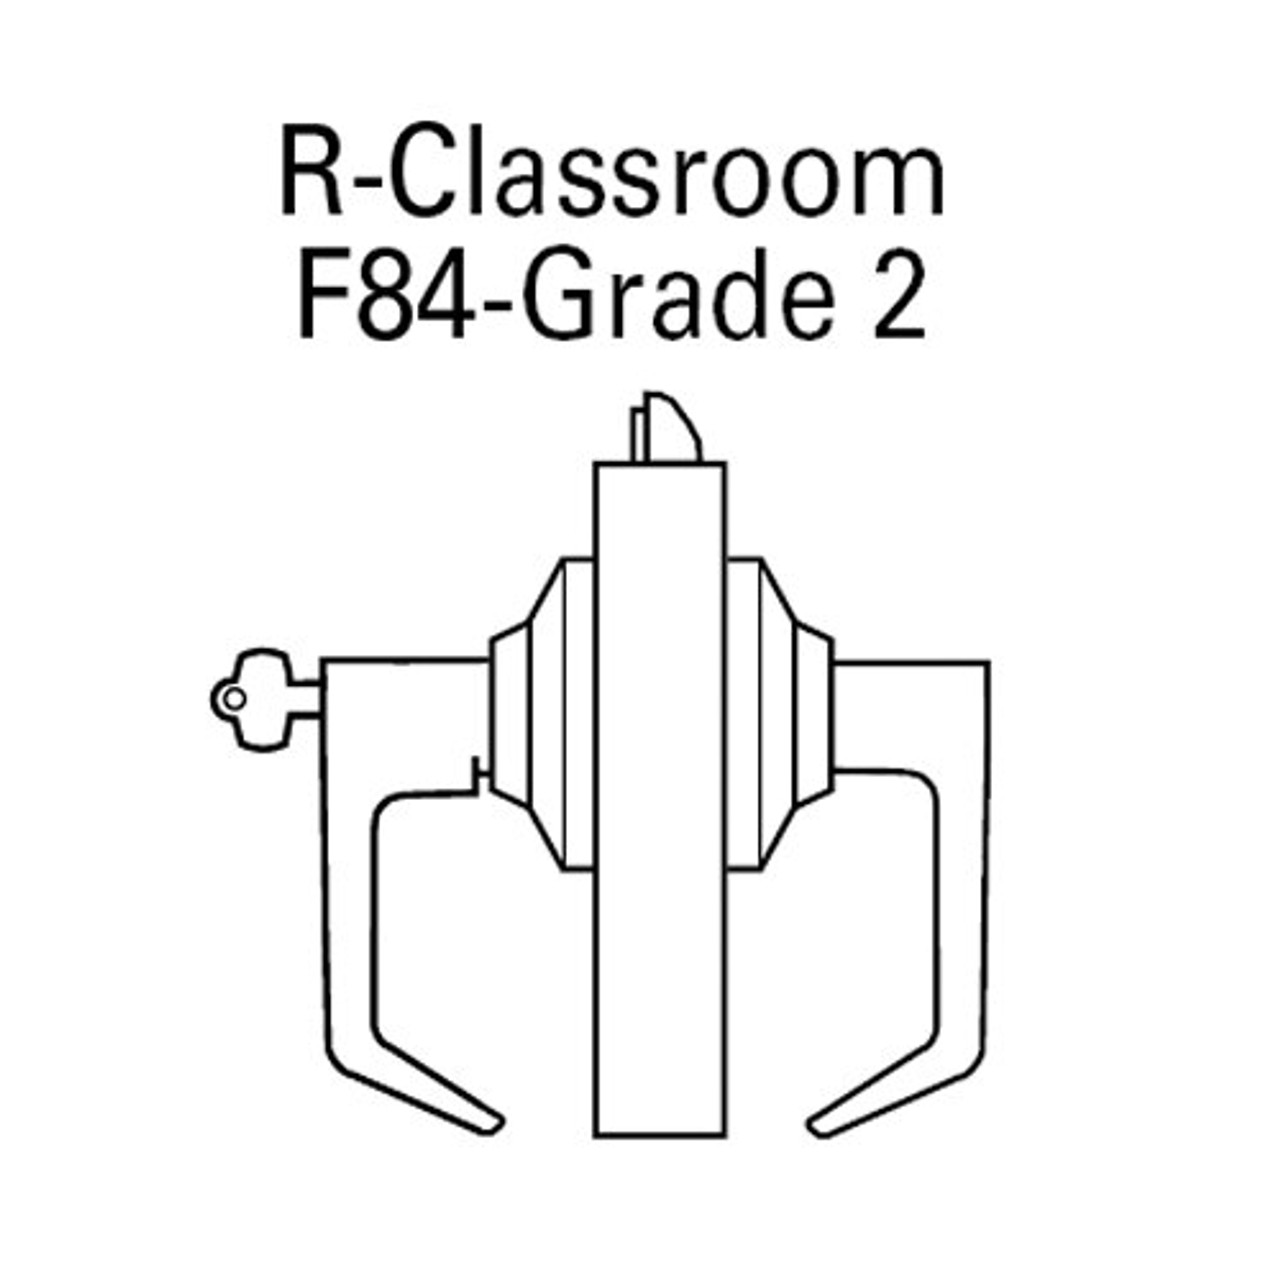 7KC57R16DSTK613 Best 7KC Series Classroom Medium Duty Cylindrical Lever Locks with Curved Without Return Lever Design in Oil Rubbed Bronze